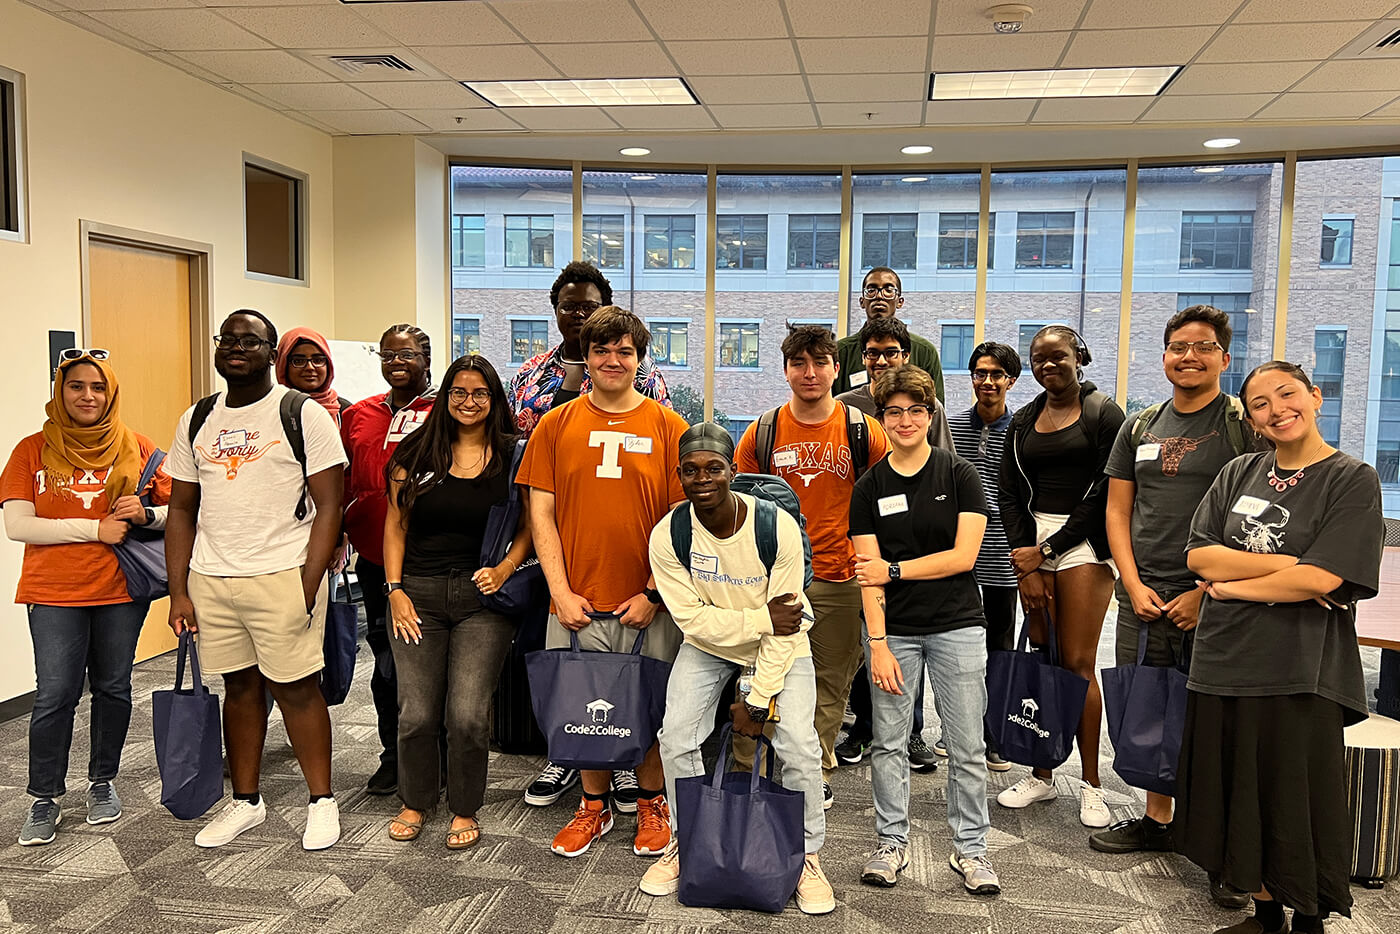 Code2College event at the University of Texas in Austin.